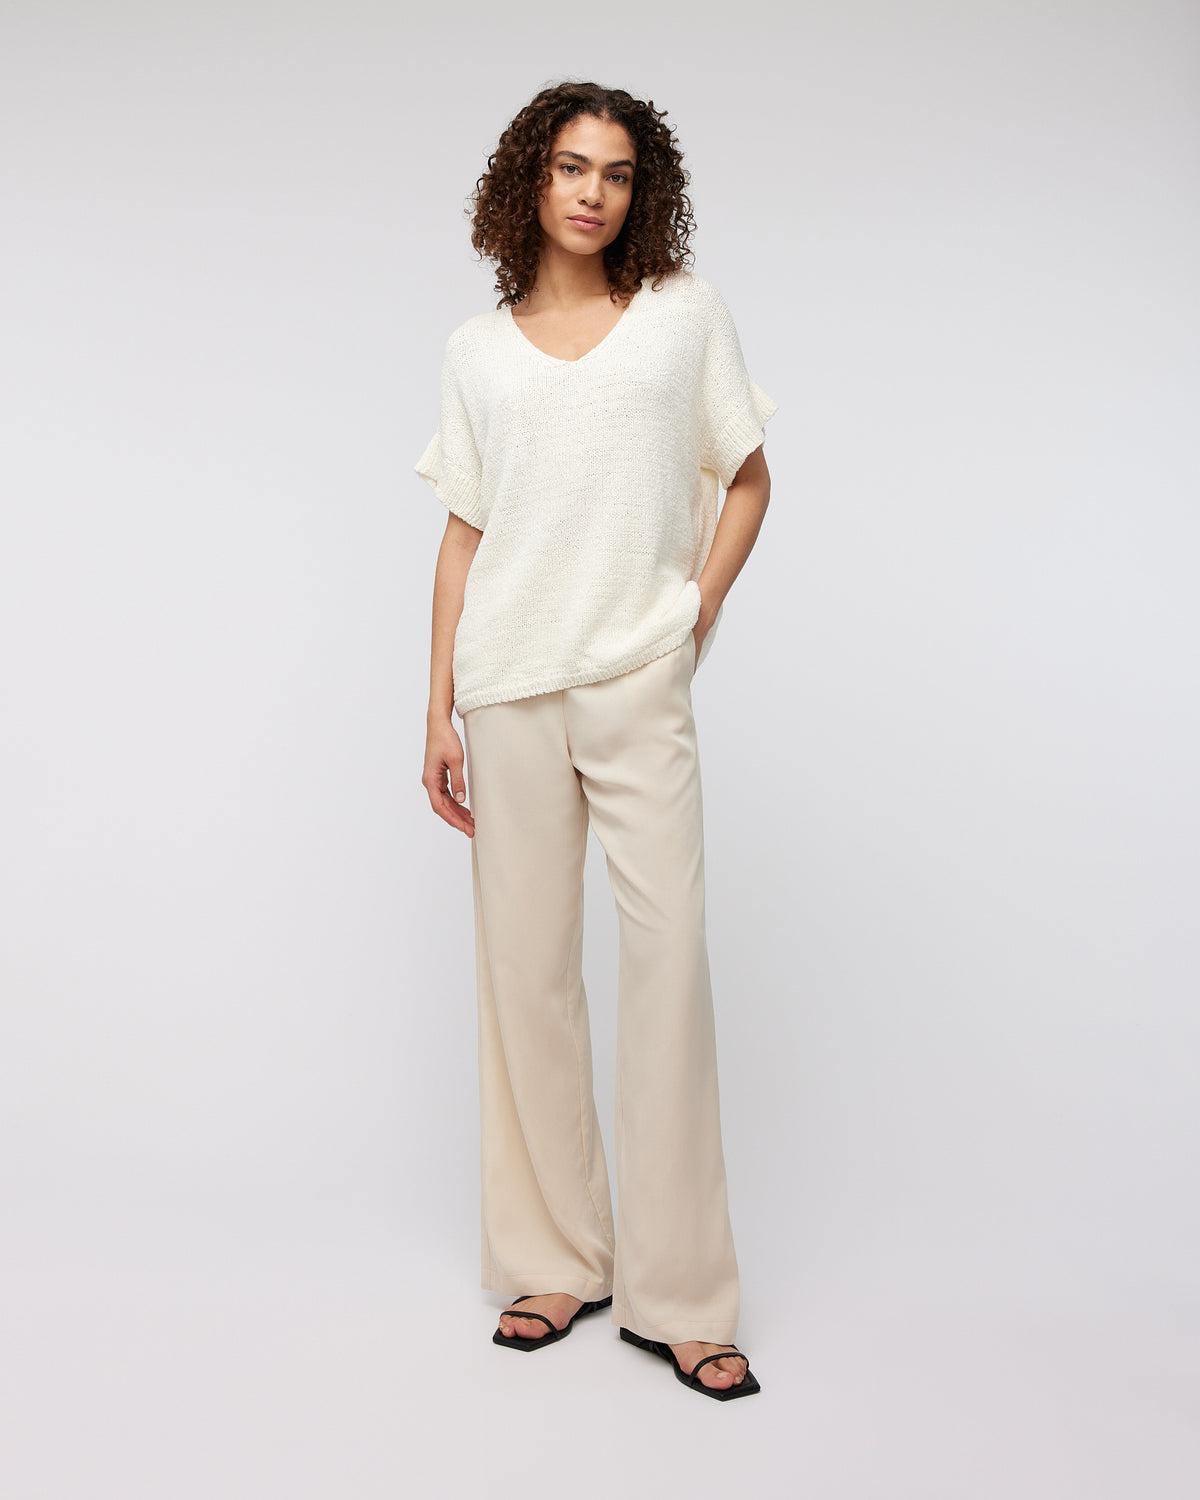 Minne Pullover Ivory